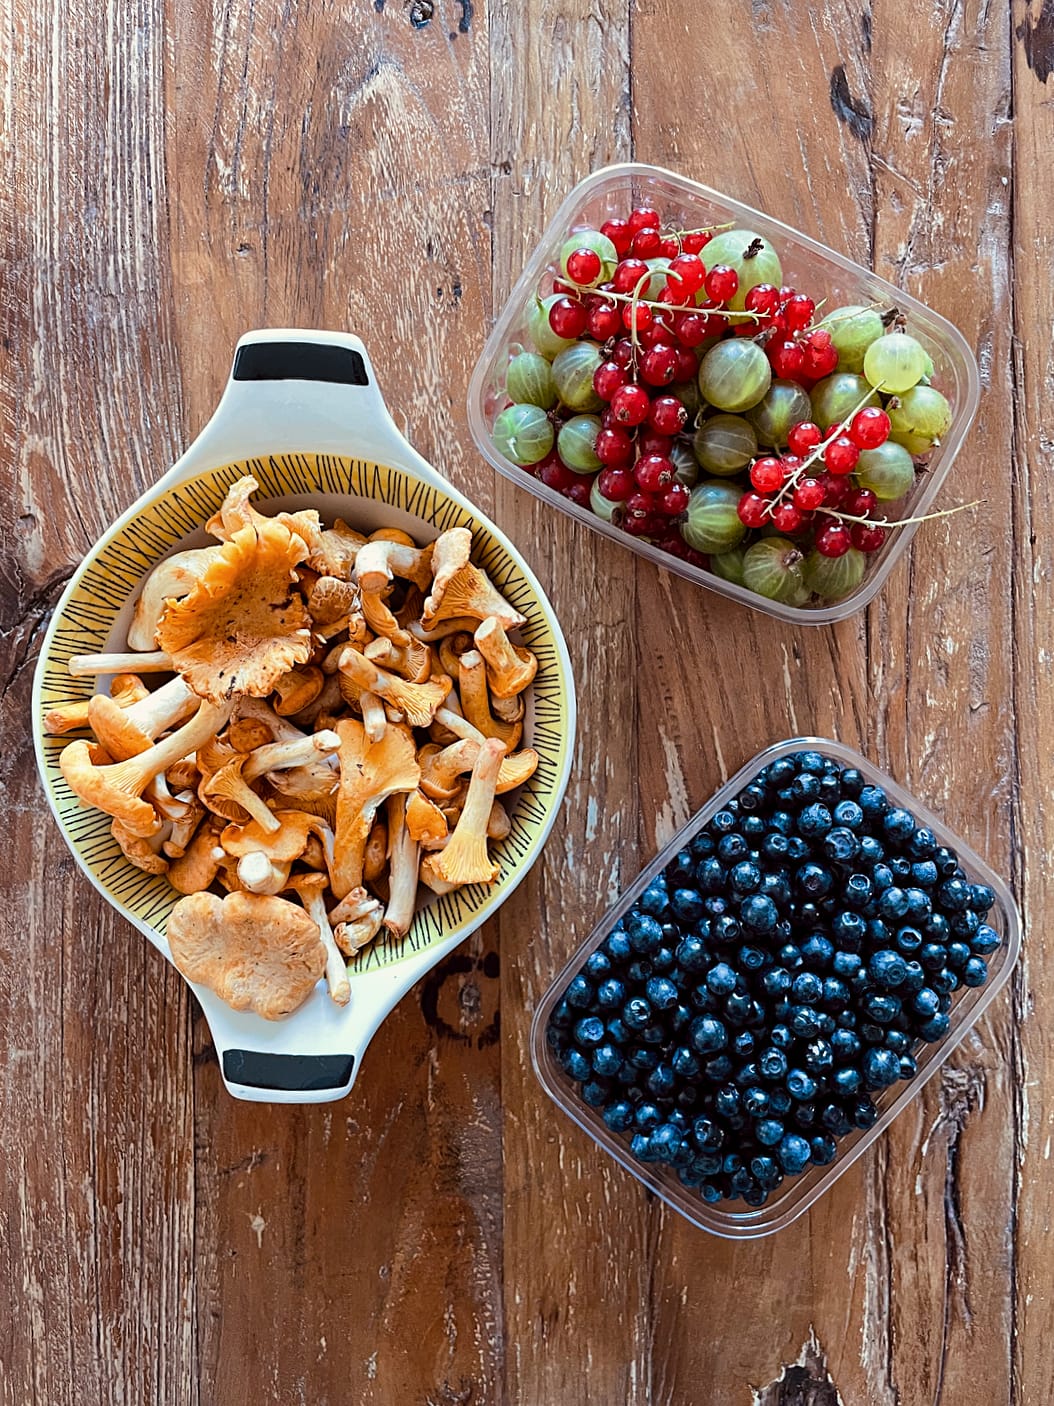 Containers on a wooden table. Filled with chanterelles, gooseberries, redcurrants, and blueberries.